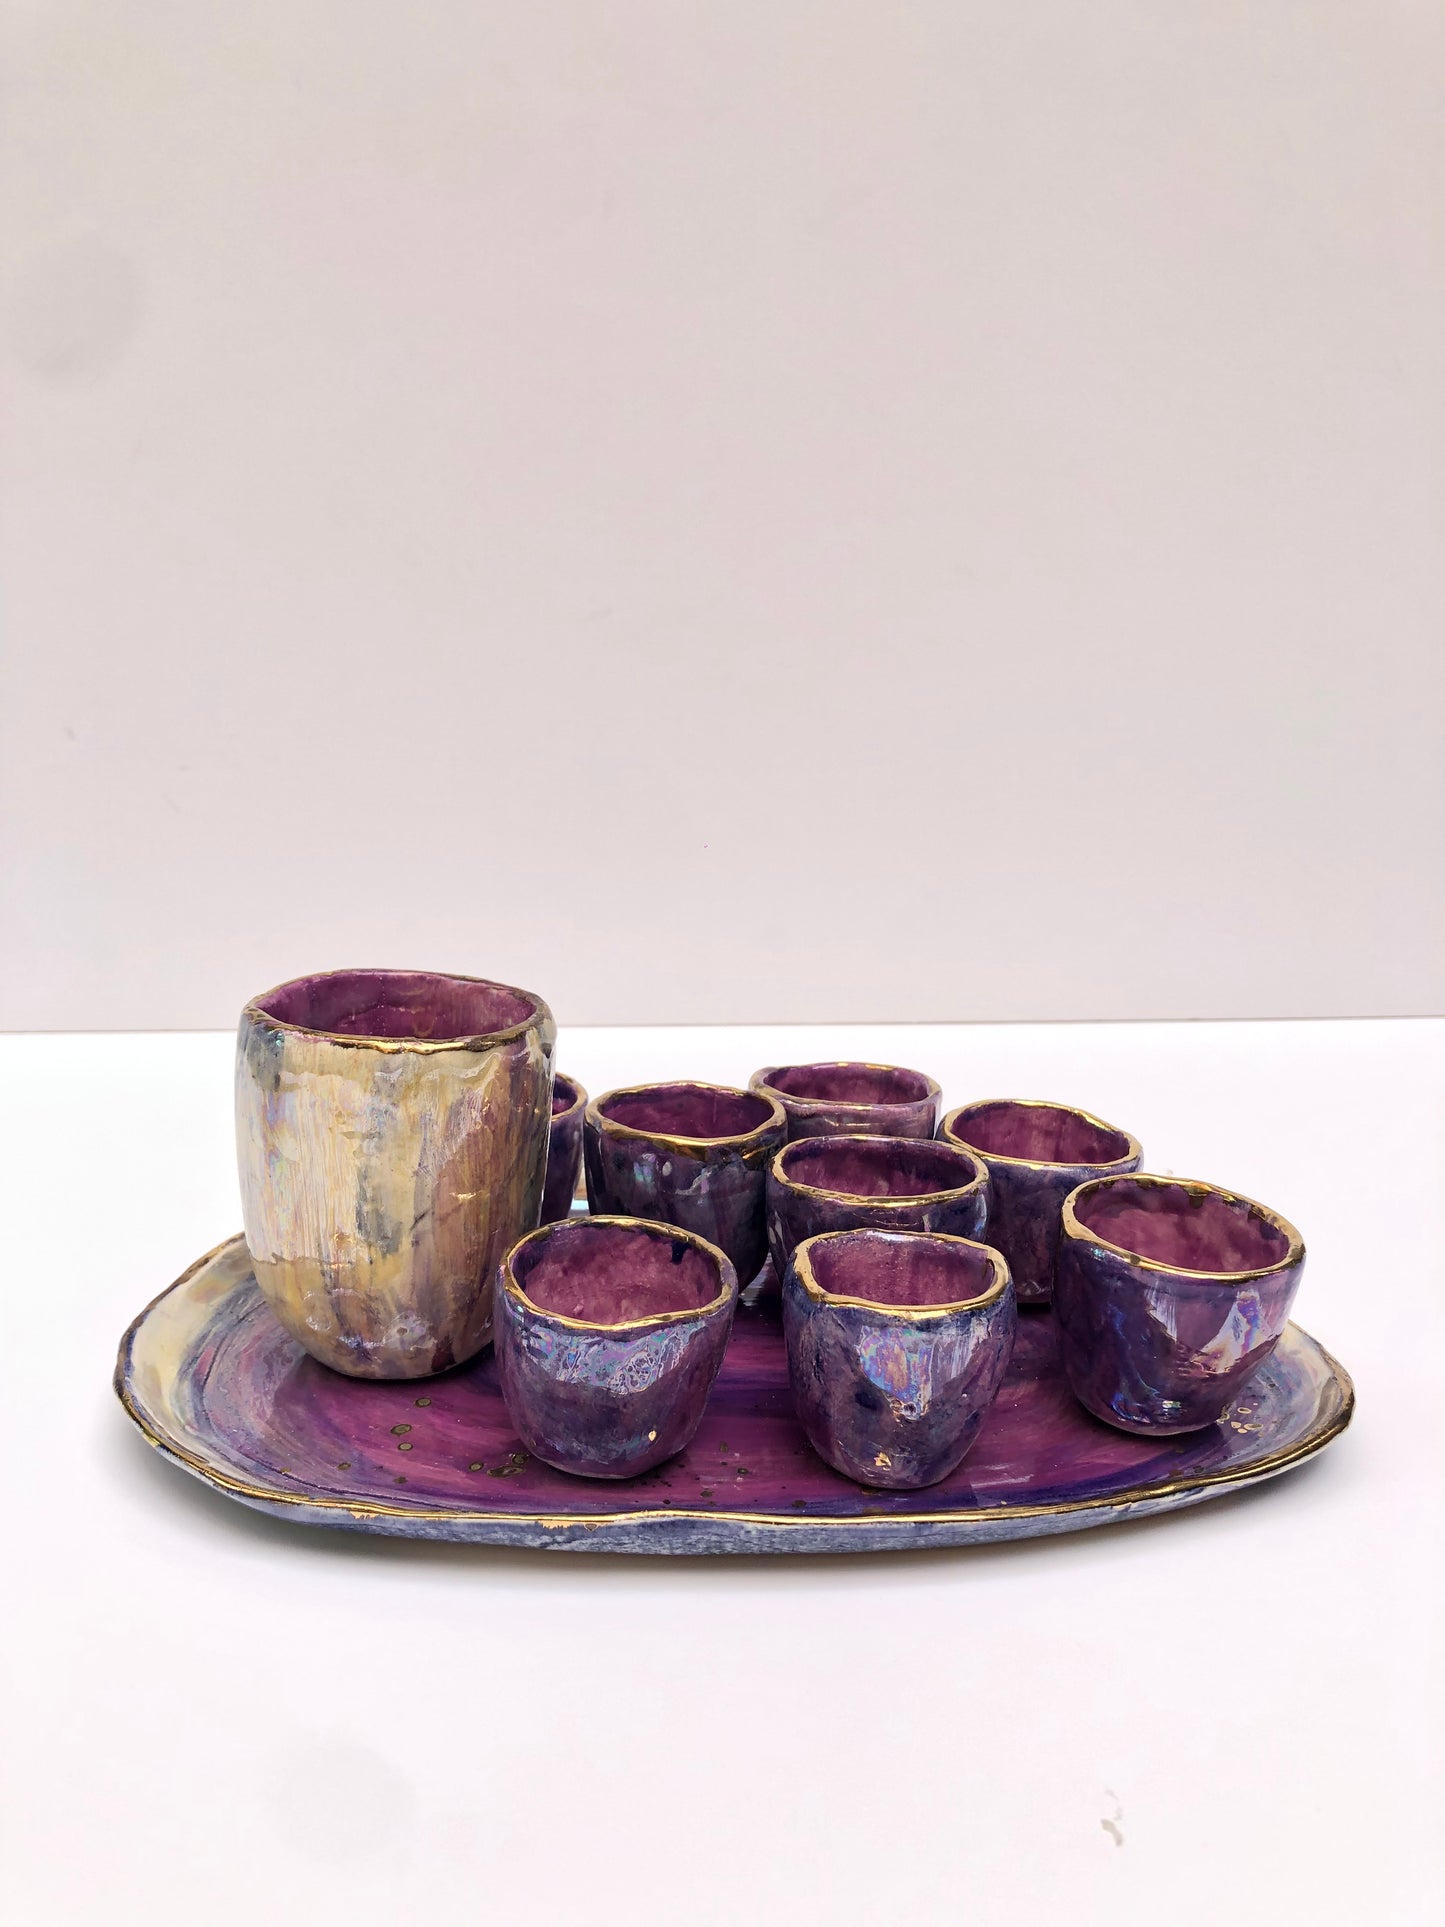 Mystical Dawn Kiddush Cup Set with 8 Small Cuppies